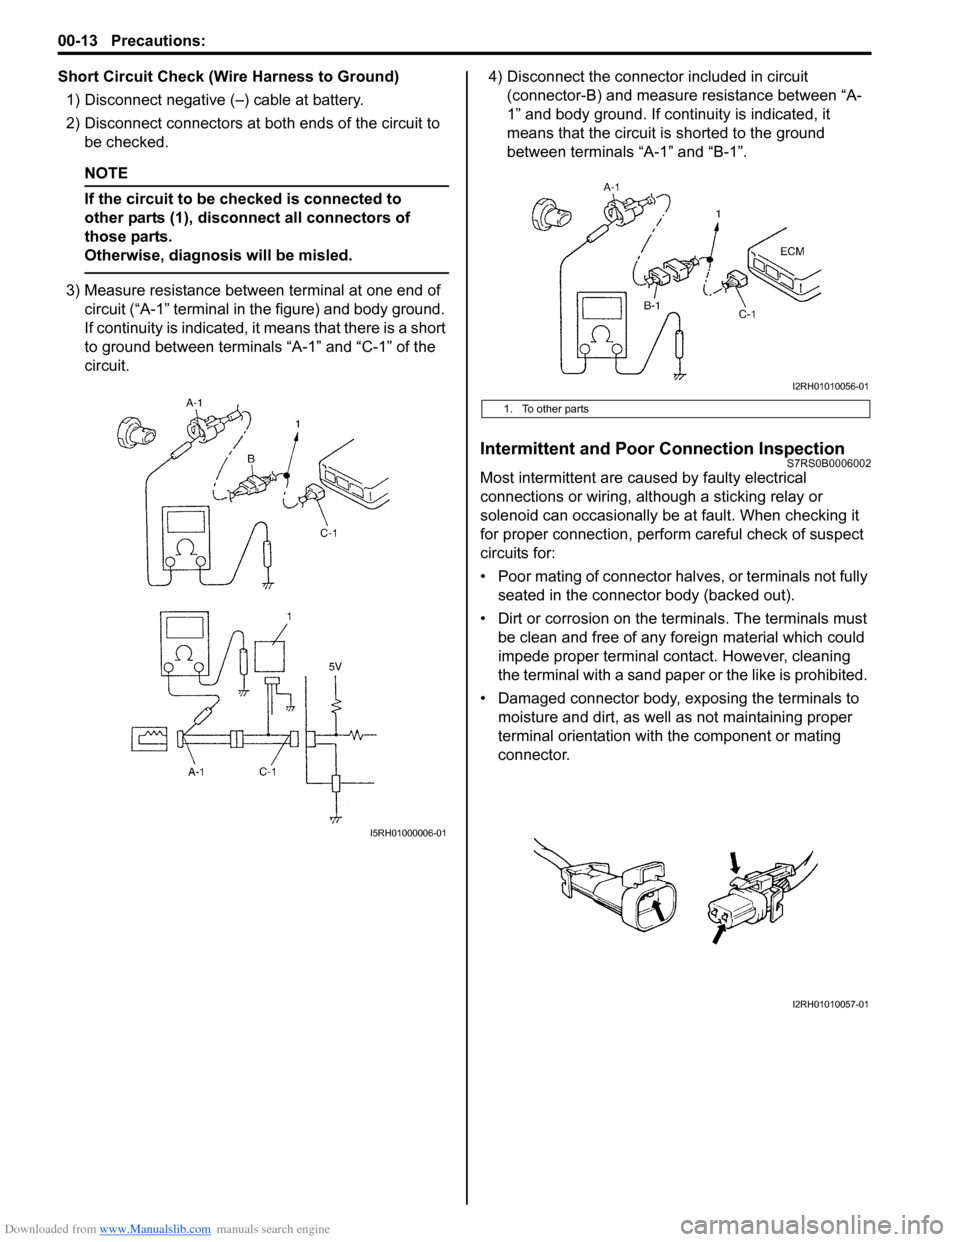 SUZUKI SWIFT 2004 2.G Service Workshop Manual Downloaded from www.Manualslib.com manuals search engine 00-13 Precautions: 
Short Circuit Check (Wire Harness to Ground)1) Disconnect negative (–) cable at battery.
2) Disconnect connectors at bot 